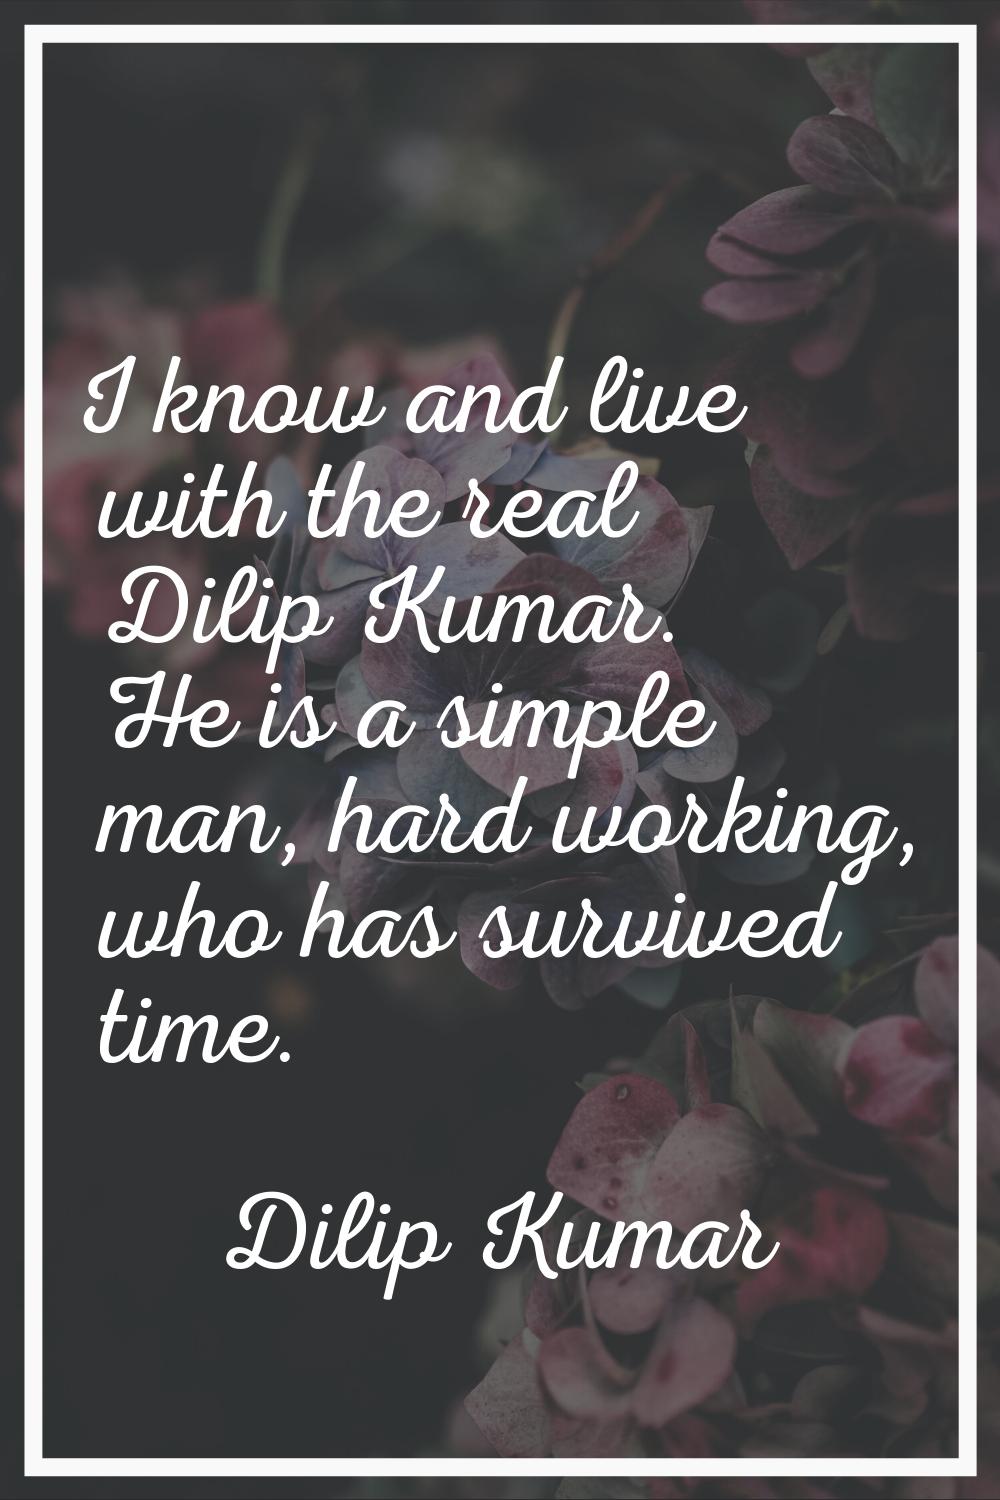 I know and live with the real Dilip Kumar. He is a simple man, hard working, who has survived time.